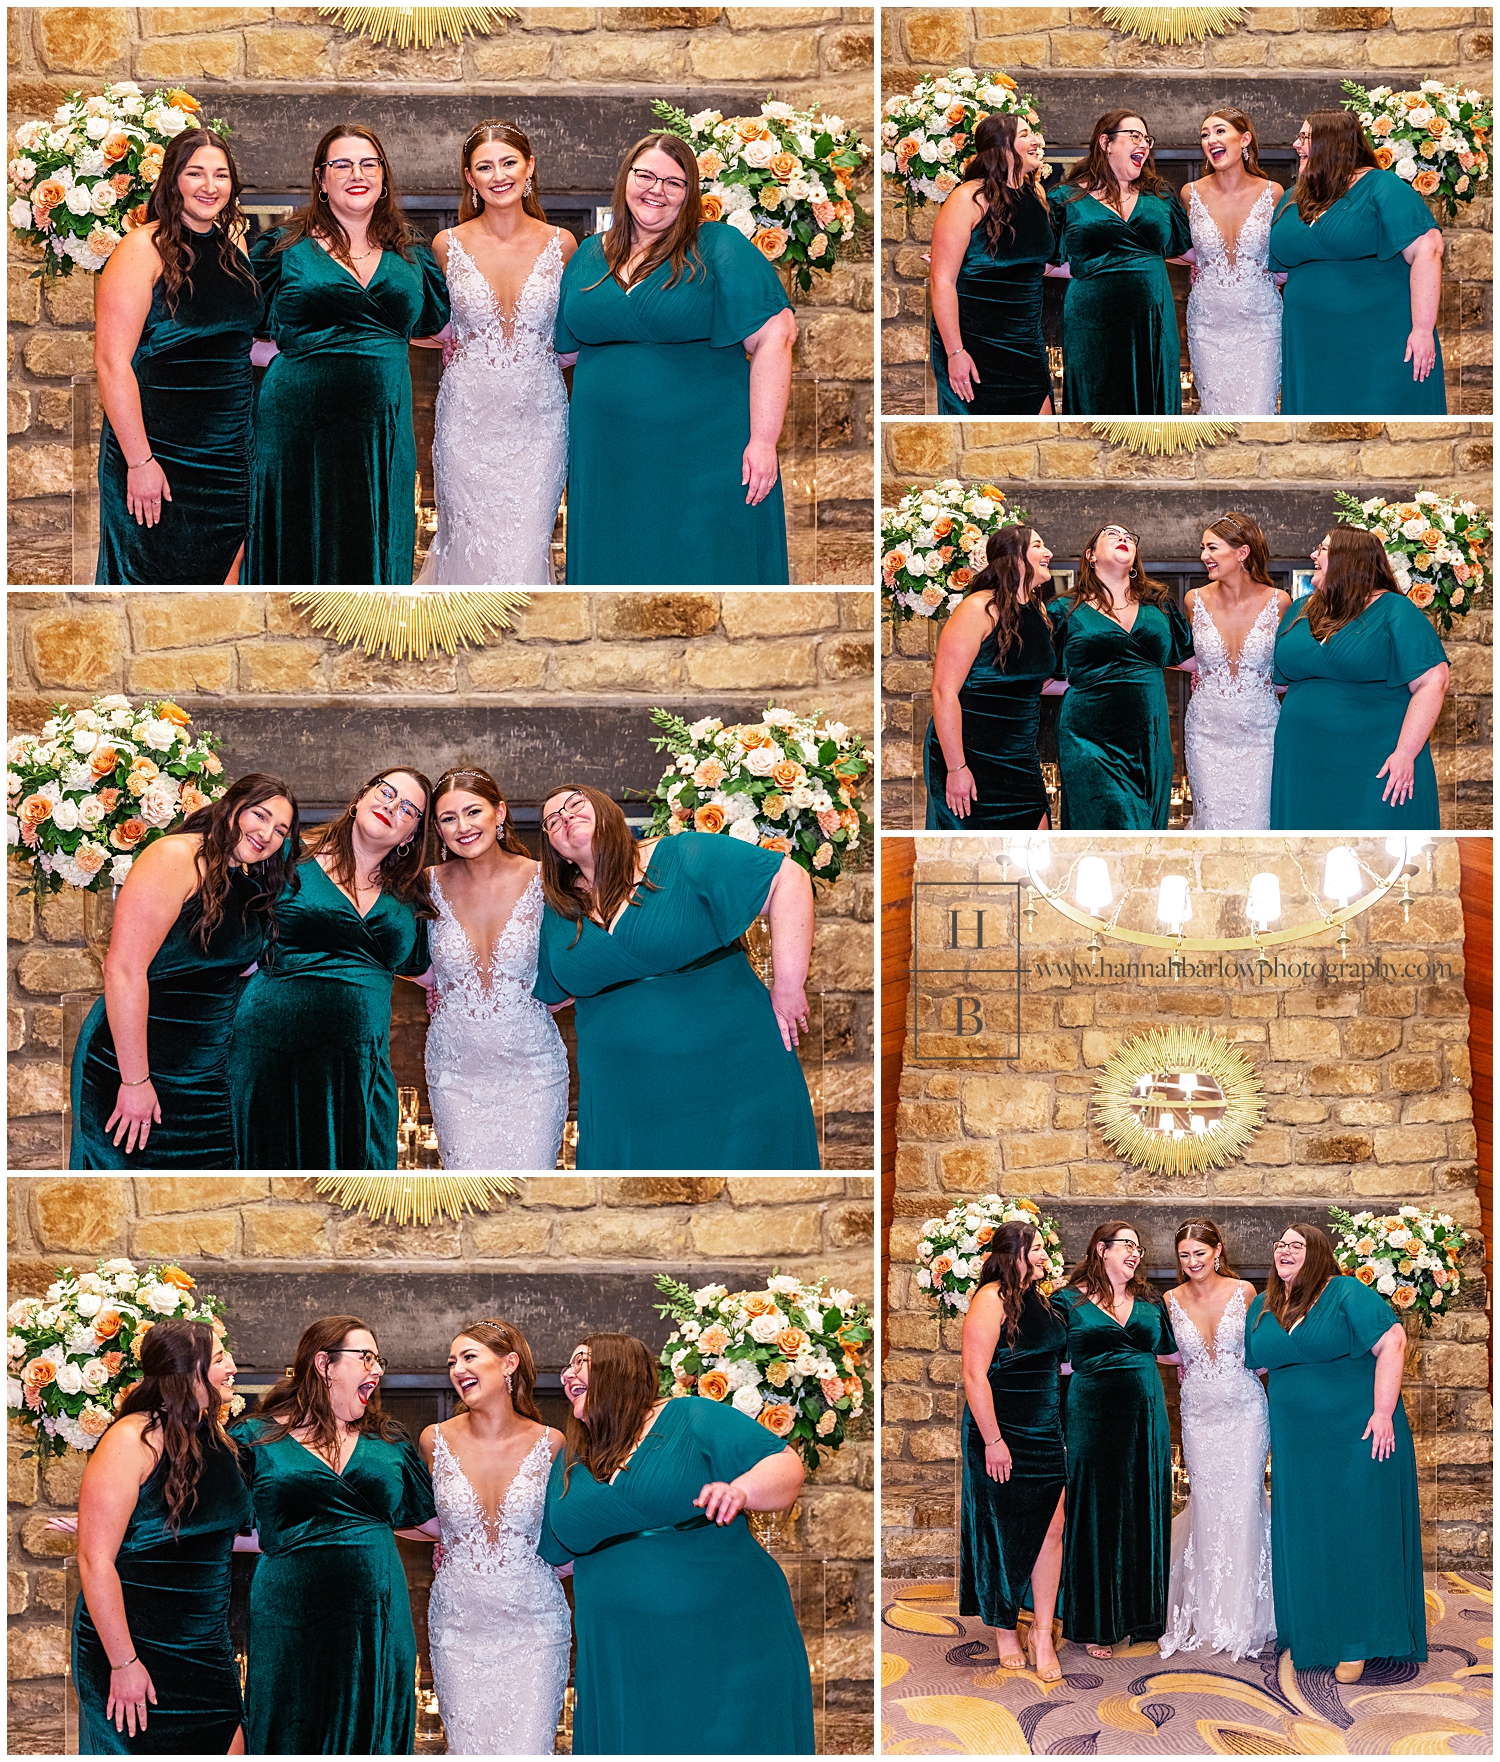 Bride poses with groom's sisters who wear complimenting green dresses.